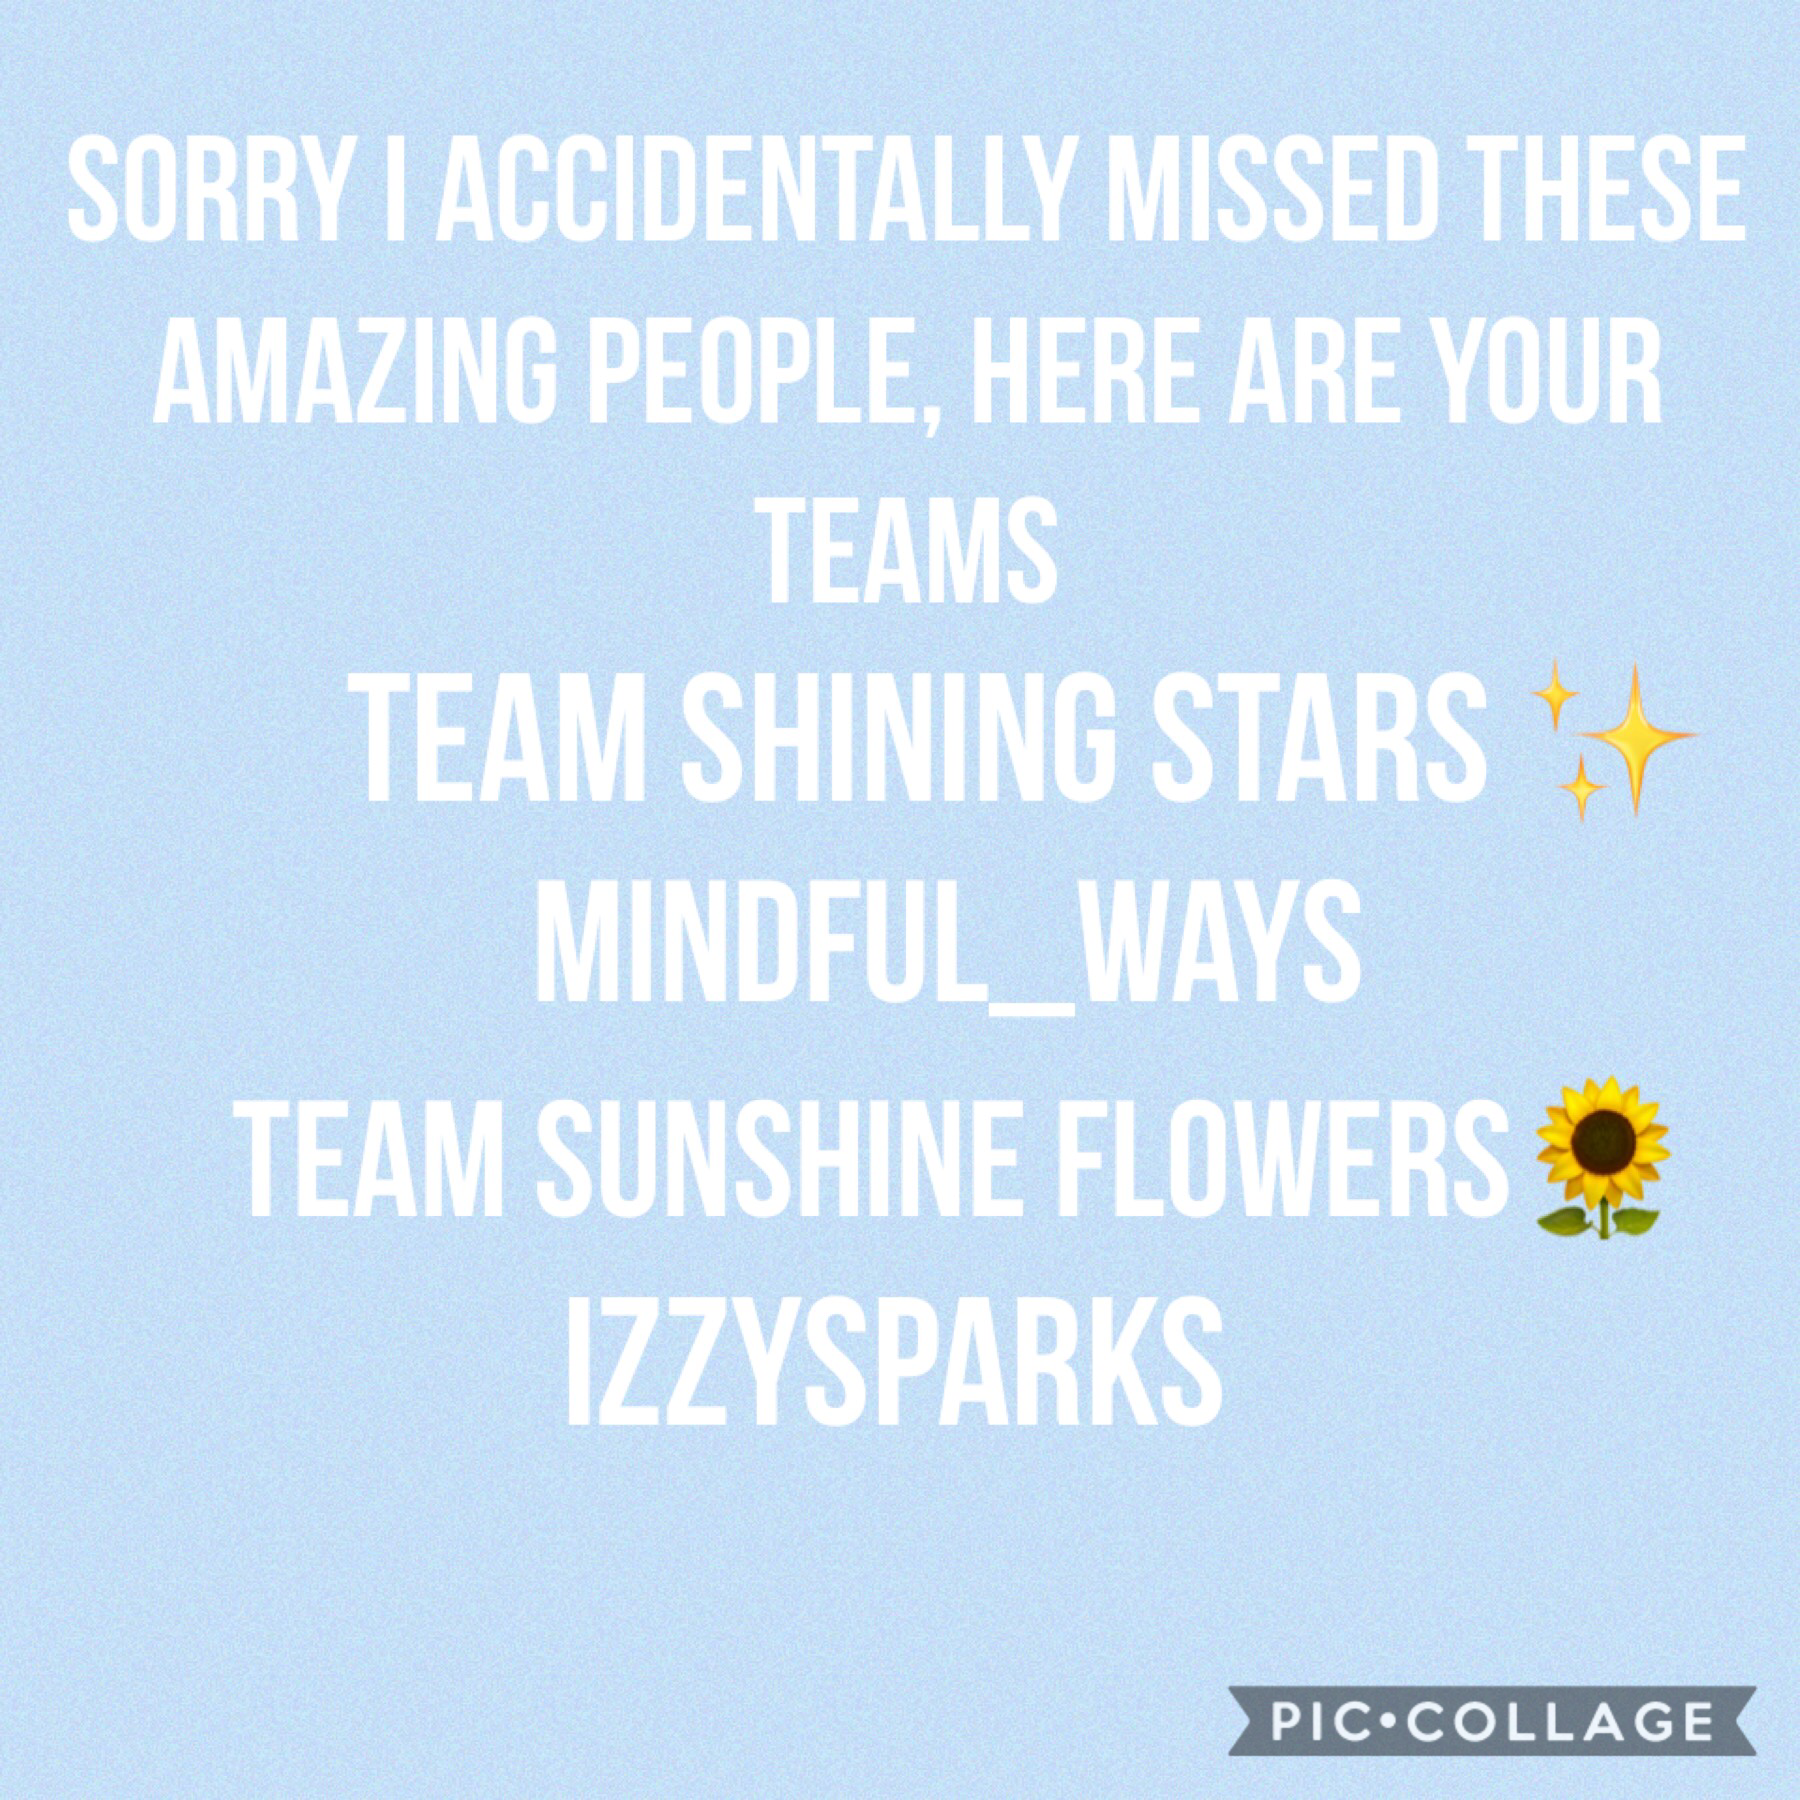 so sorry, I accidentally missed these amazing people in the teams lists, so here are your teams!!